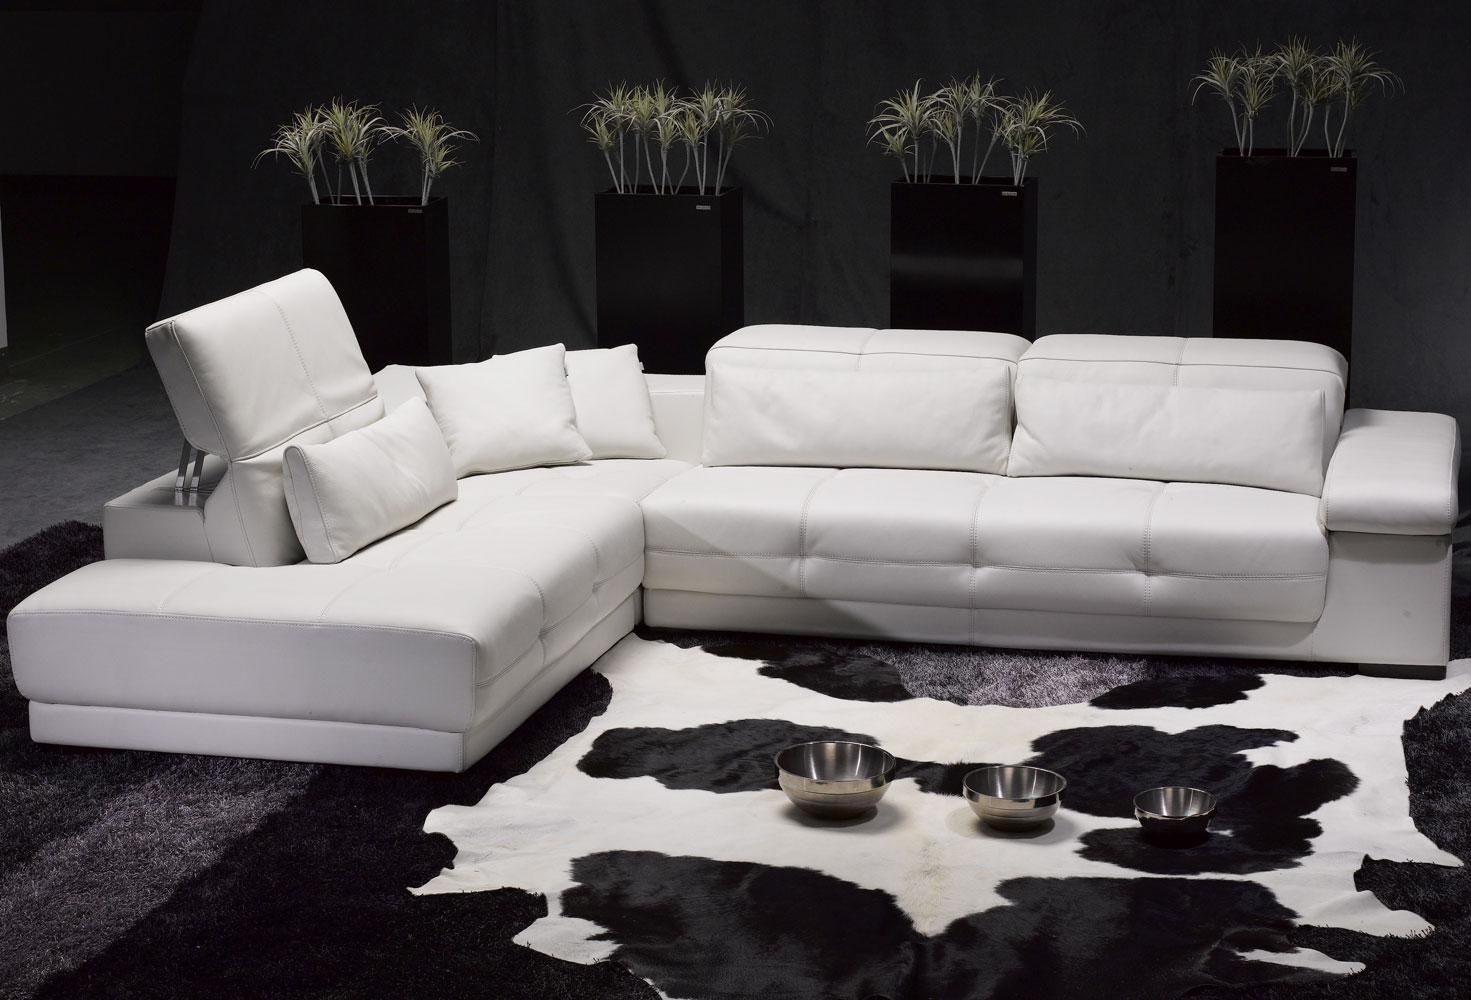 Alluring White Leather Sectional Sofa Ideas For Living Room – Somats With White Sectional Sofas (View 2 of 10)